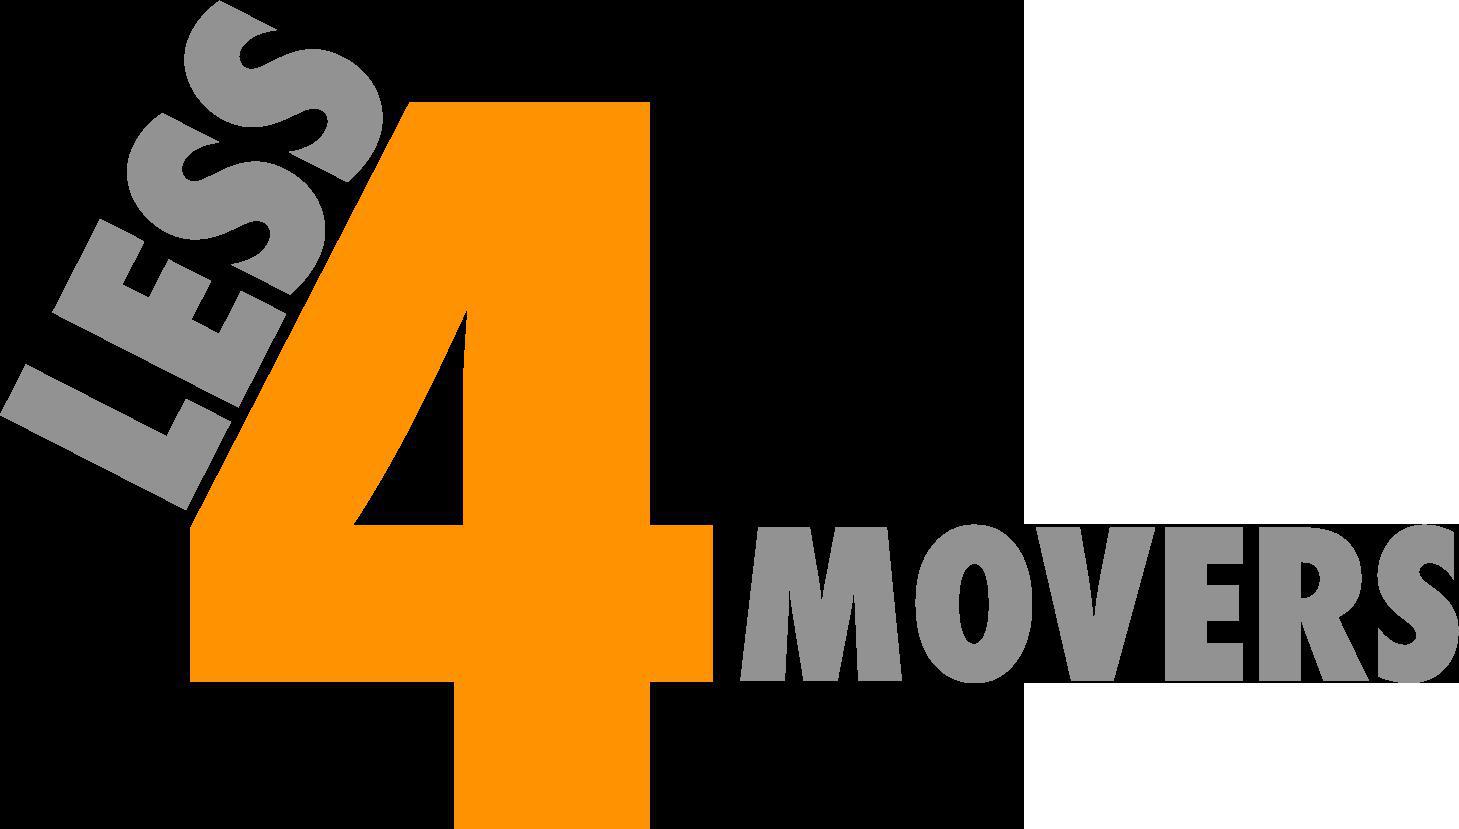 Less 4 Movers logo